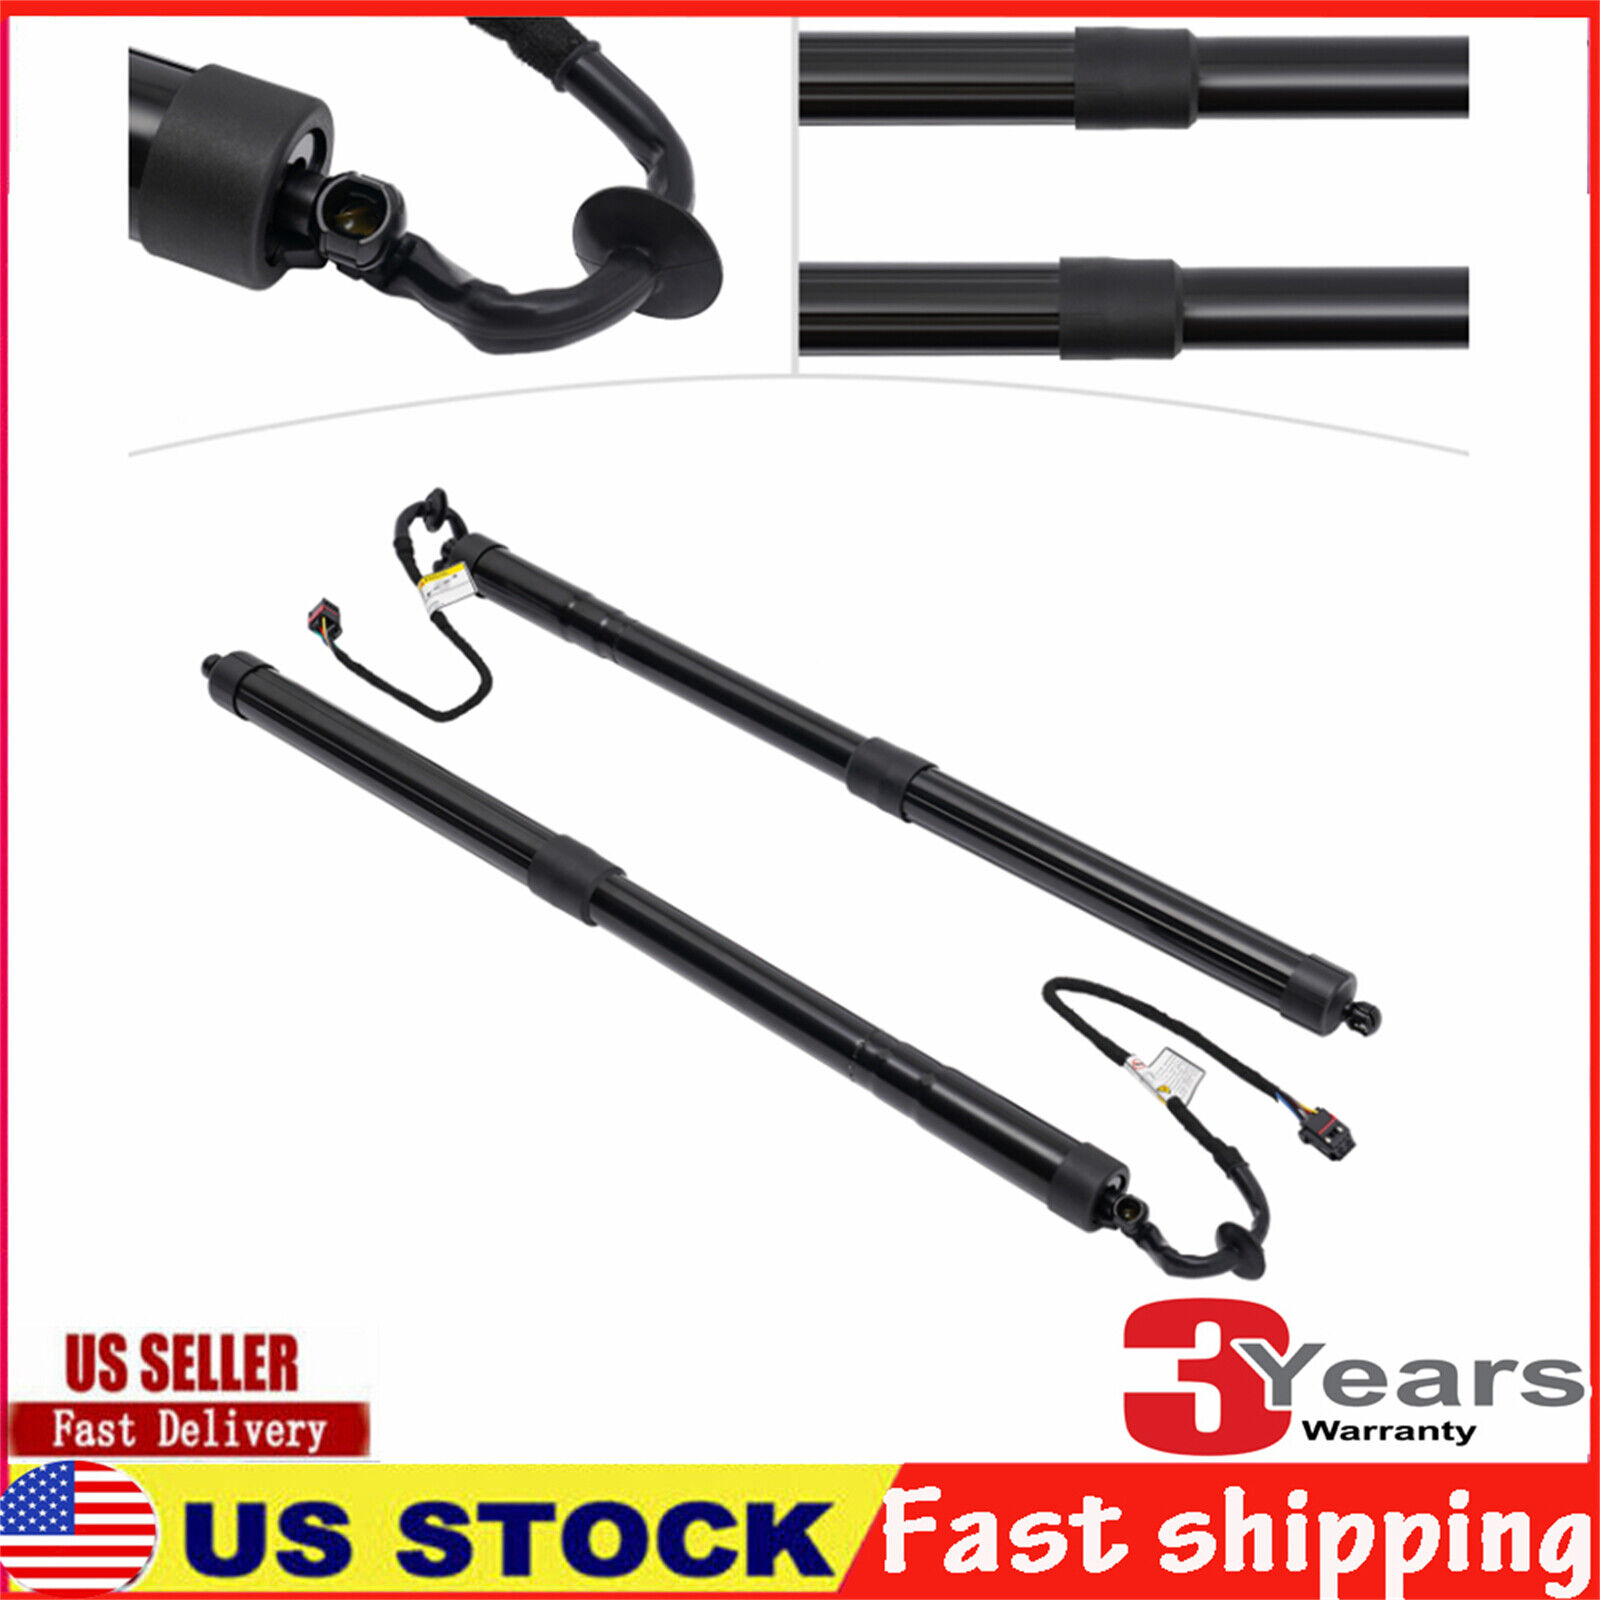 2x Rear Electric Tailgate Power Lift Supports For Porsche Cayenne 2011 - 2014